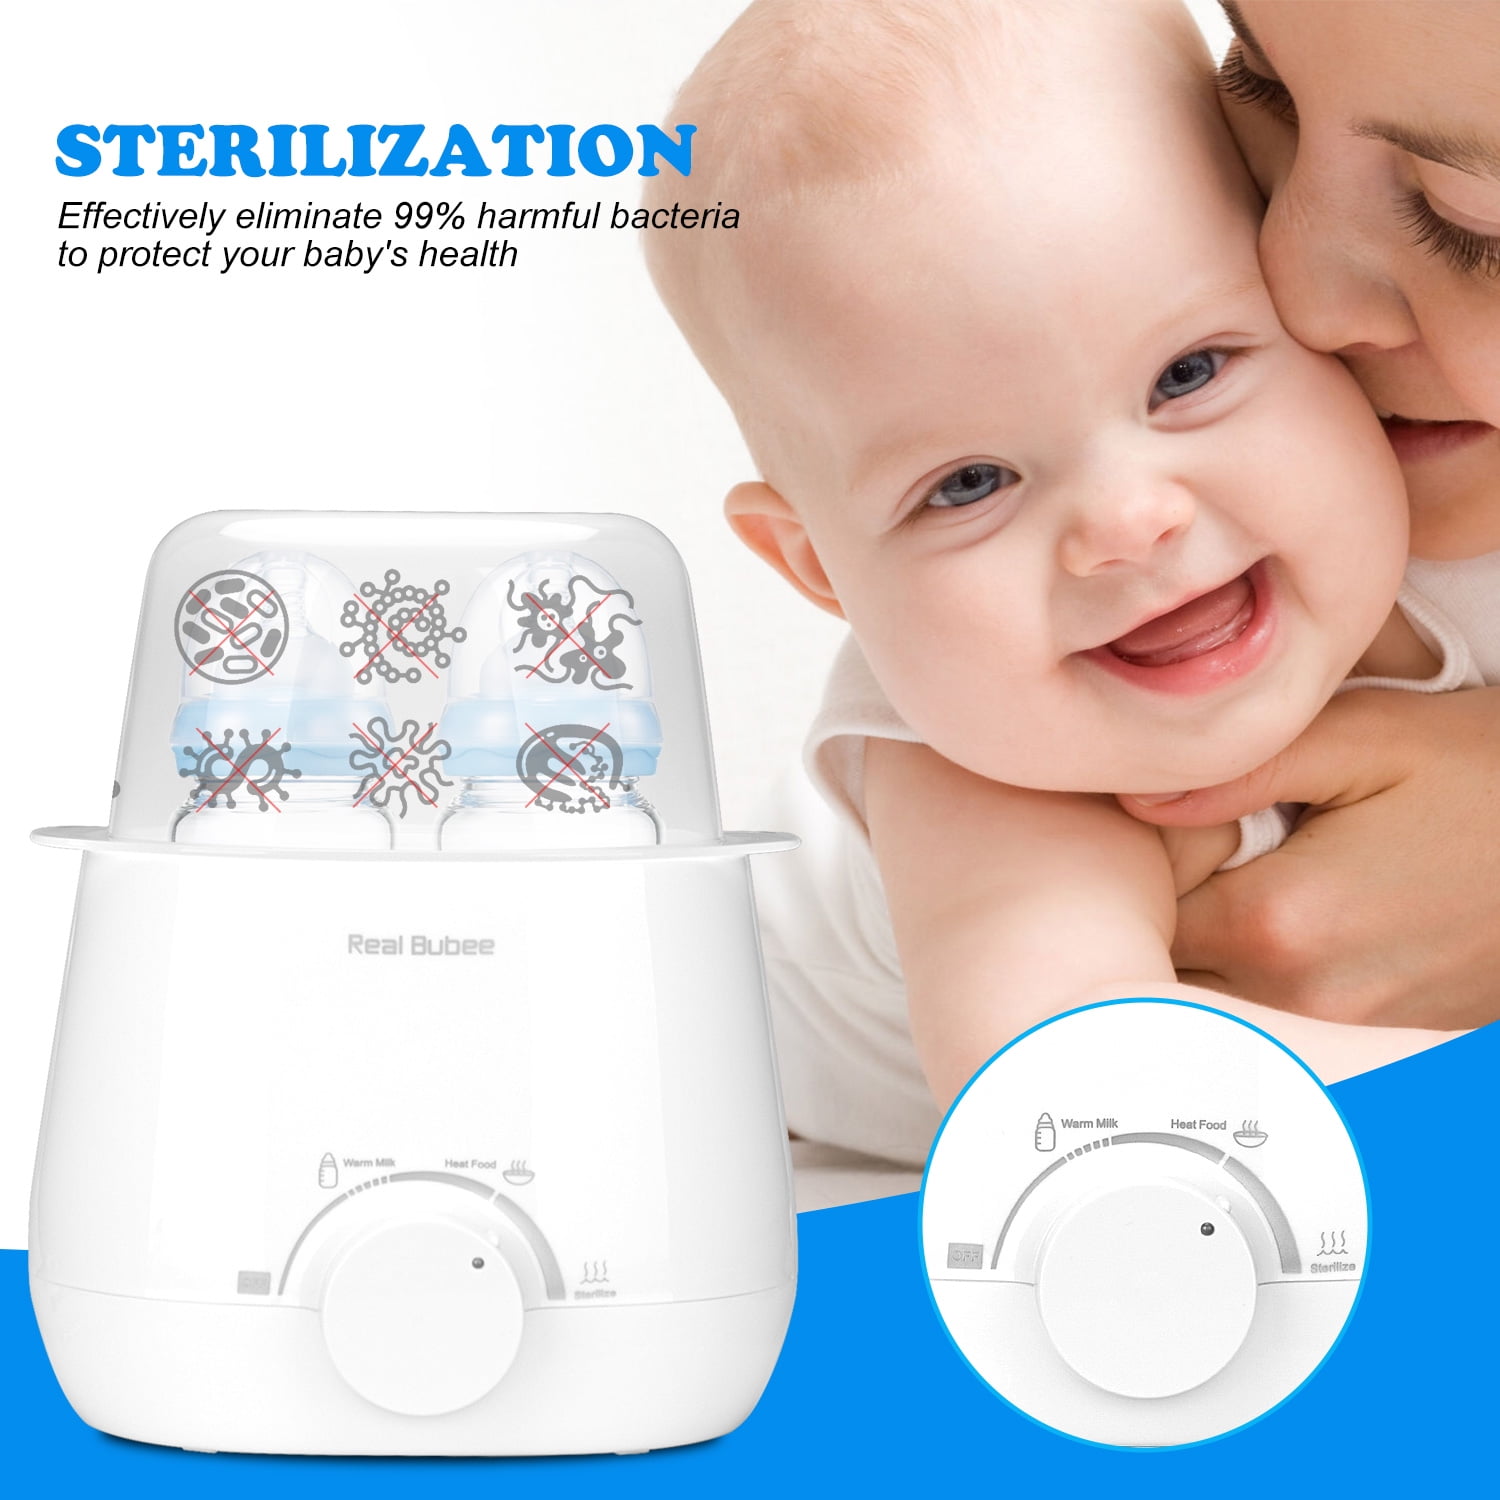 Real Bubee Double Baby Bottle Warmer and Bottle Sterilizer